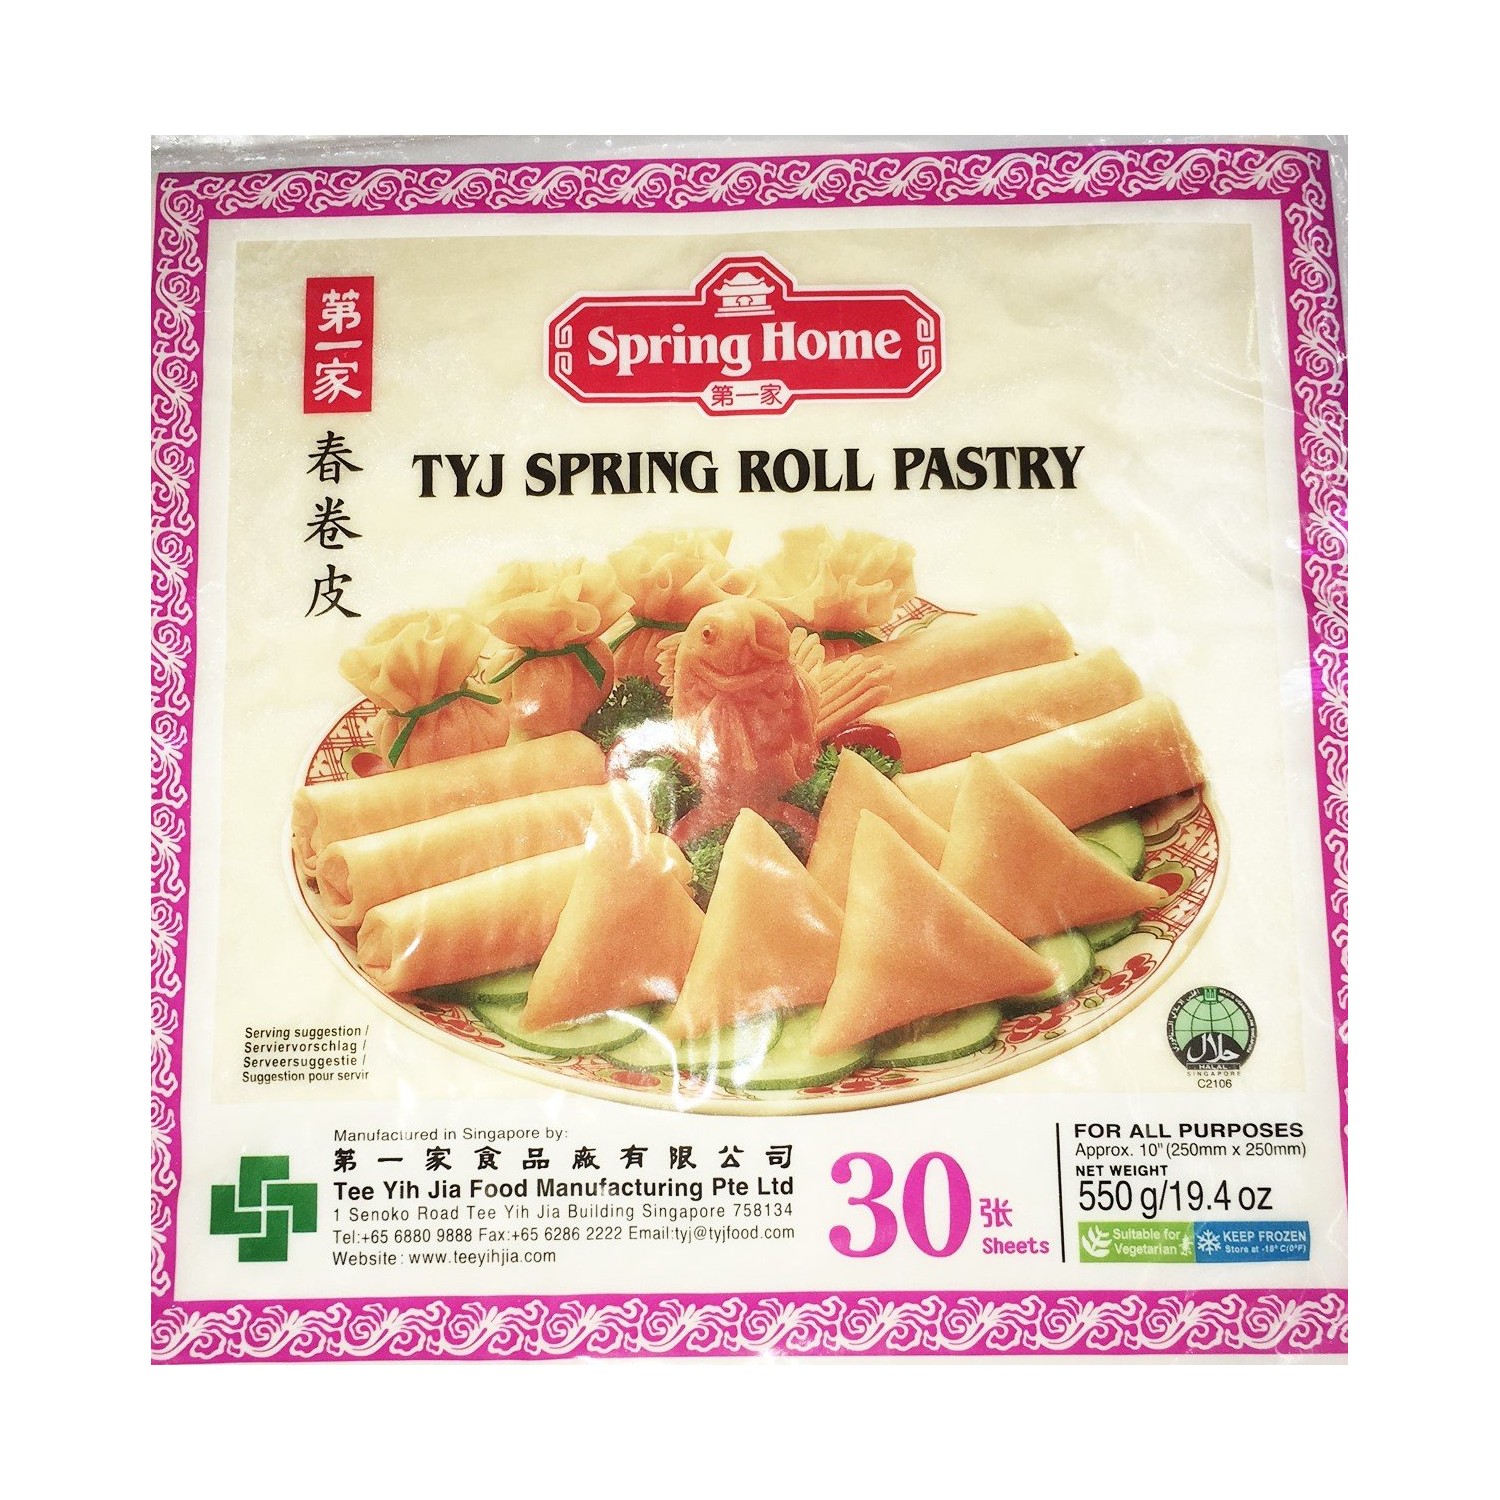 Spring Home TYJ 550g Frozen 10" Spring Roll Pastry (30 Sheets)